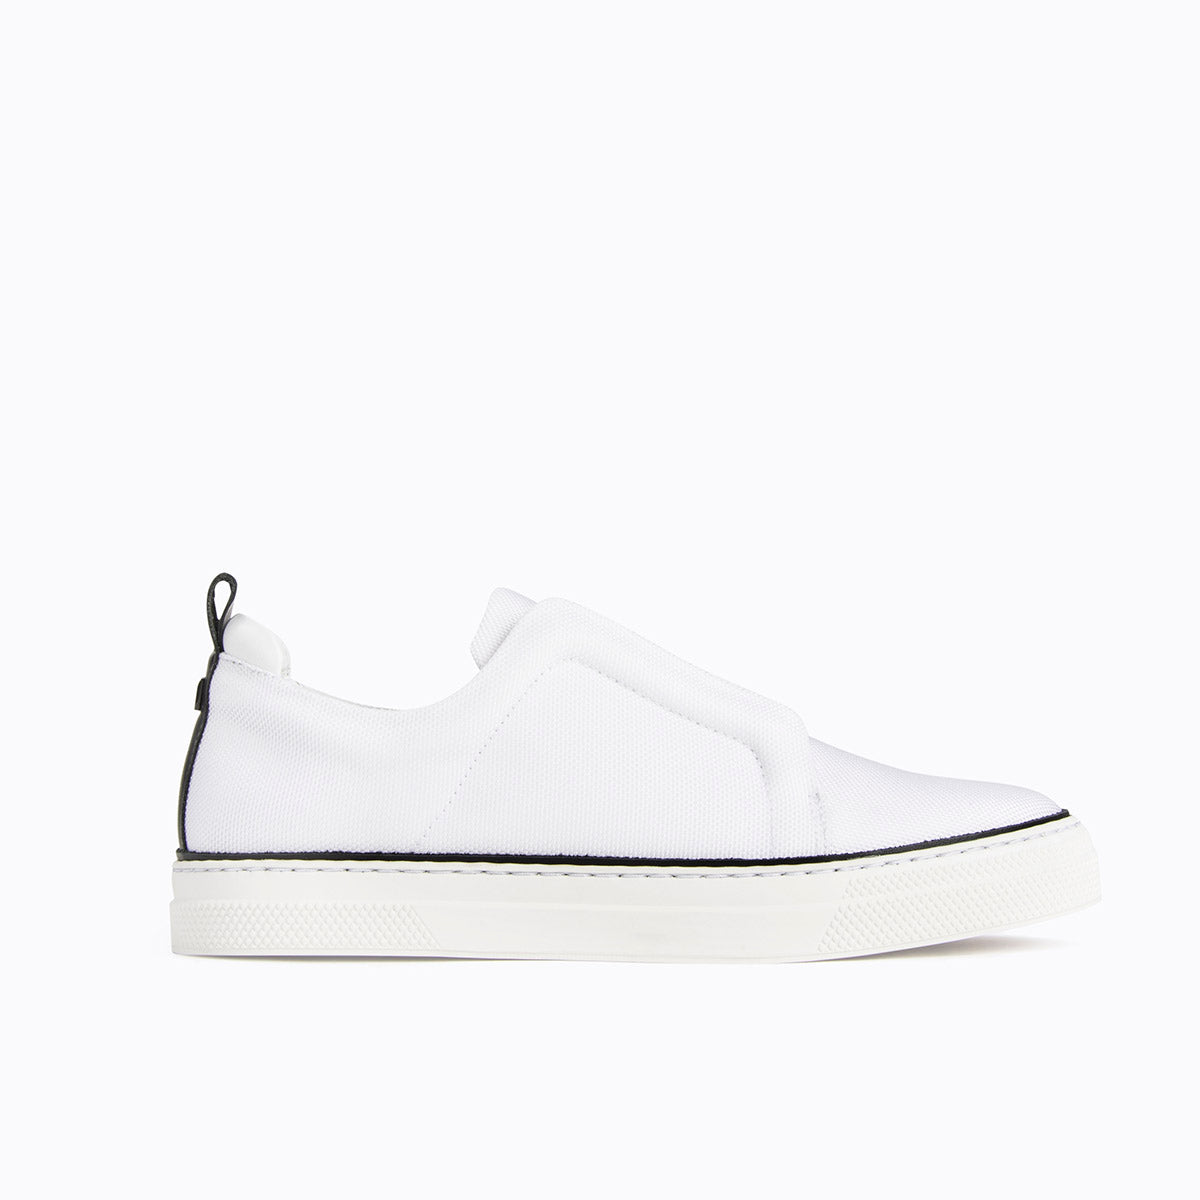 SLIDER sneakers for women in white nylon canvas & leather — PIERRE HARDY